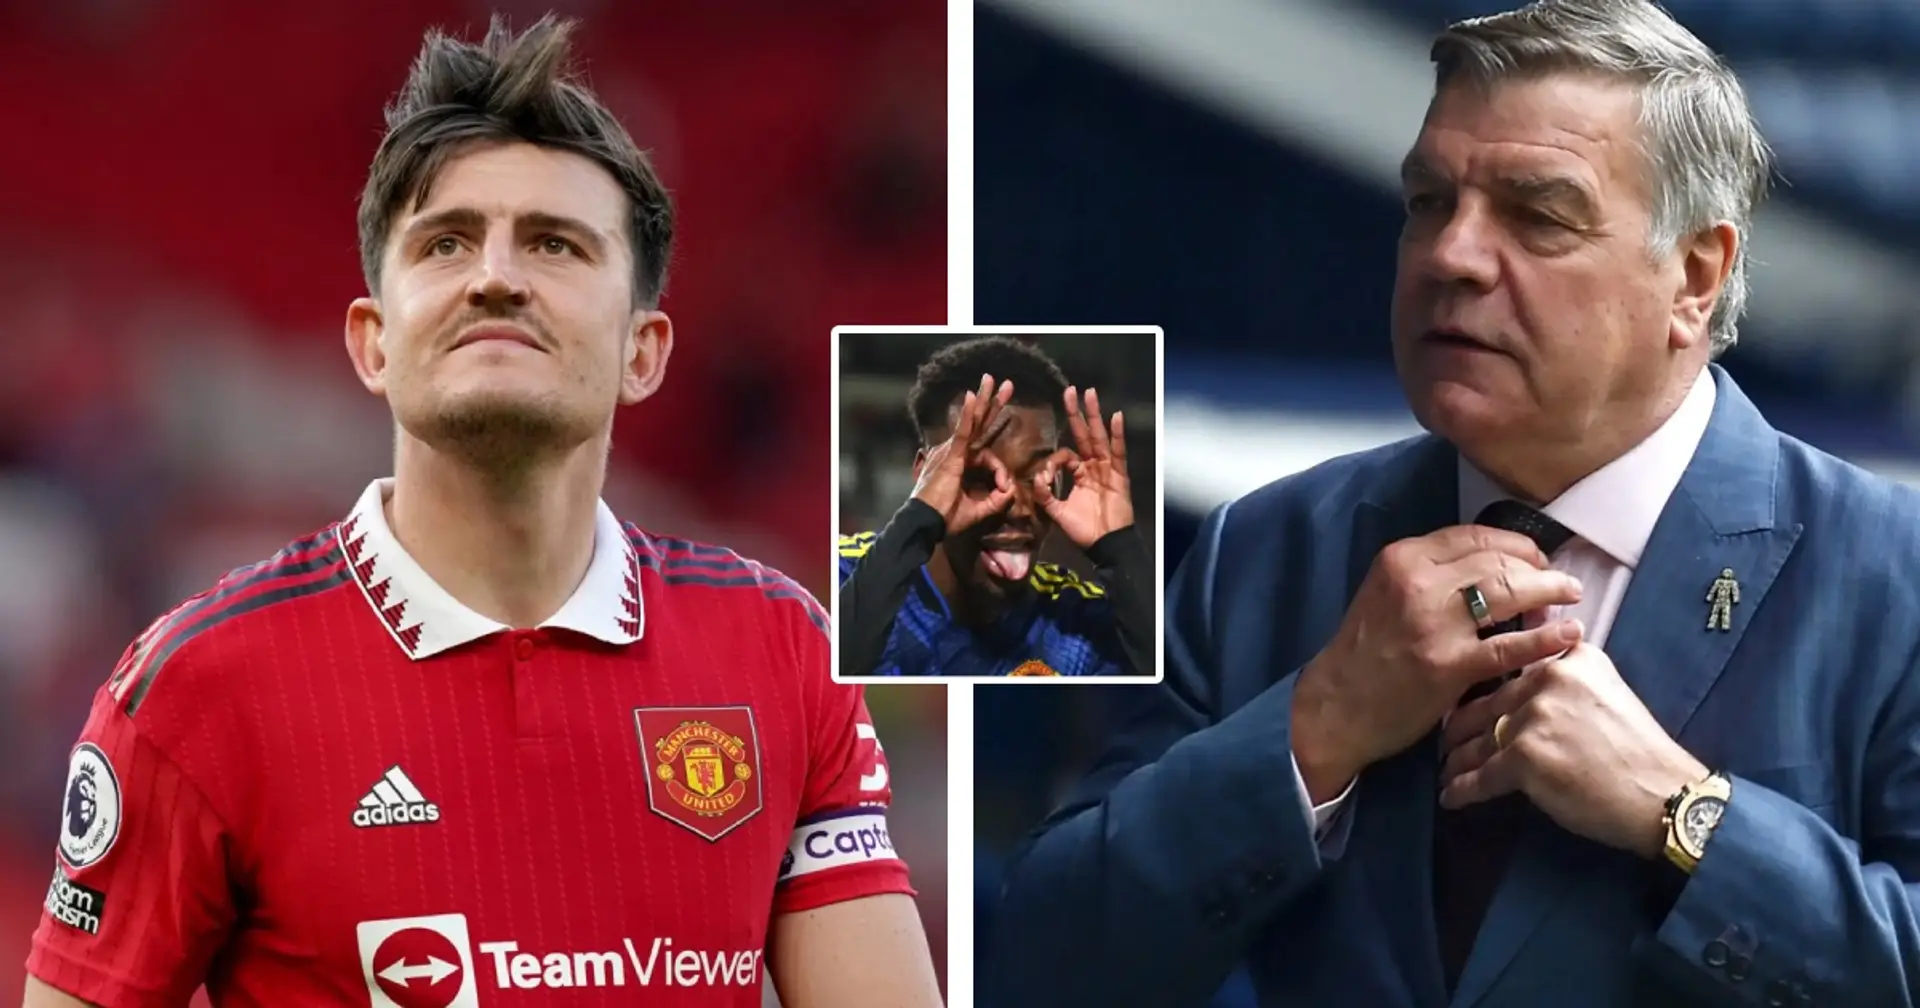 Allardyce chooses next club for Maguire & 2 more under-radar stories at Man United today